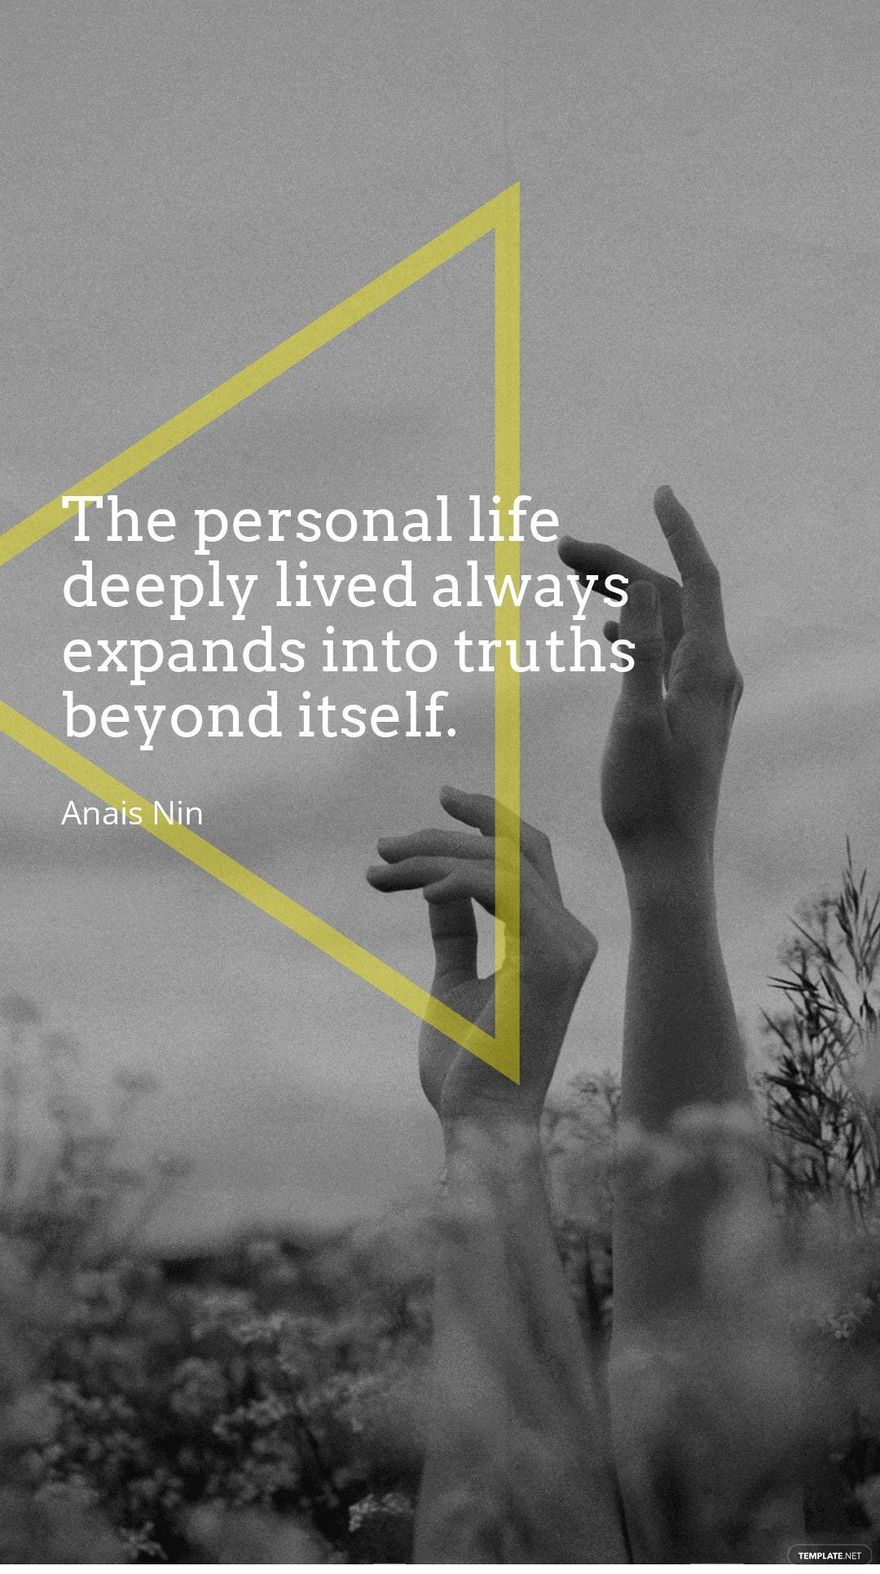 Anais Nin - The personal life deeply lived always expands into truths beyond itself.